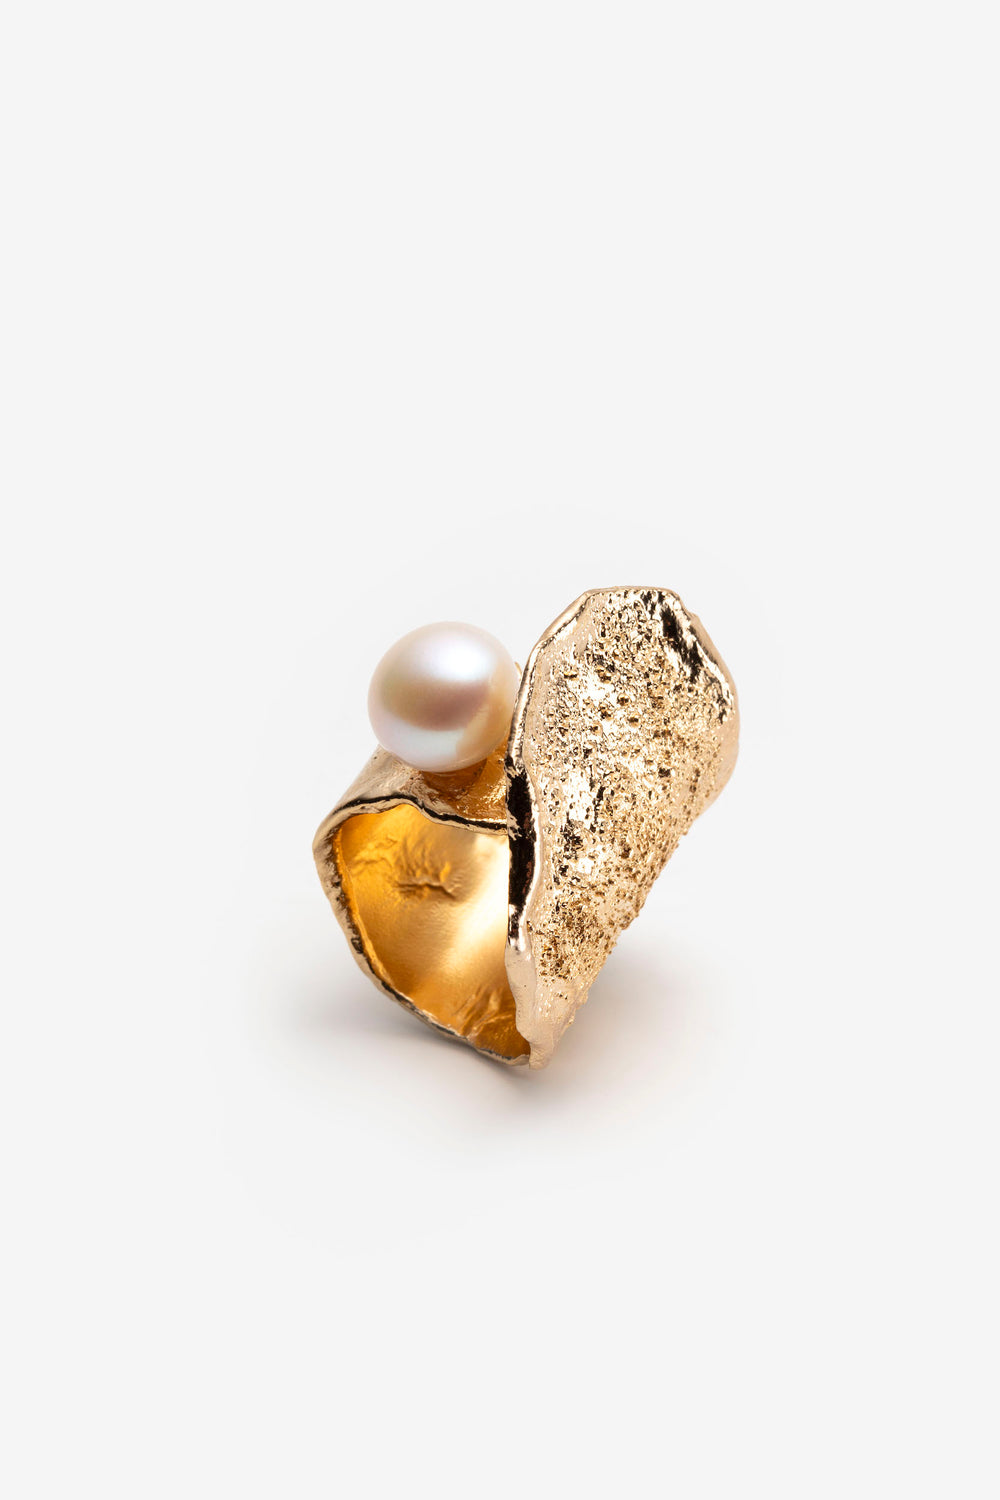 Golden OLAS ring and freshwater pearl